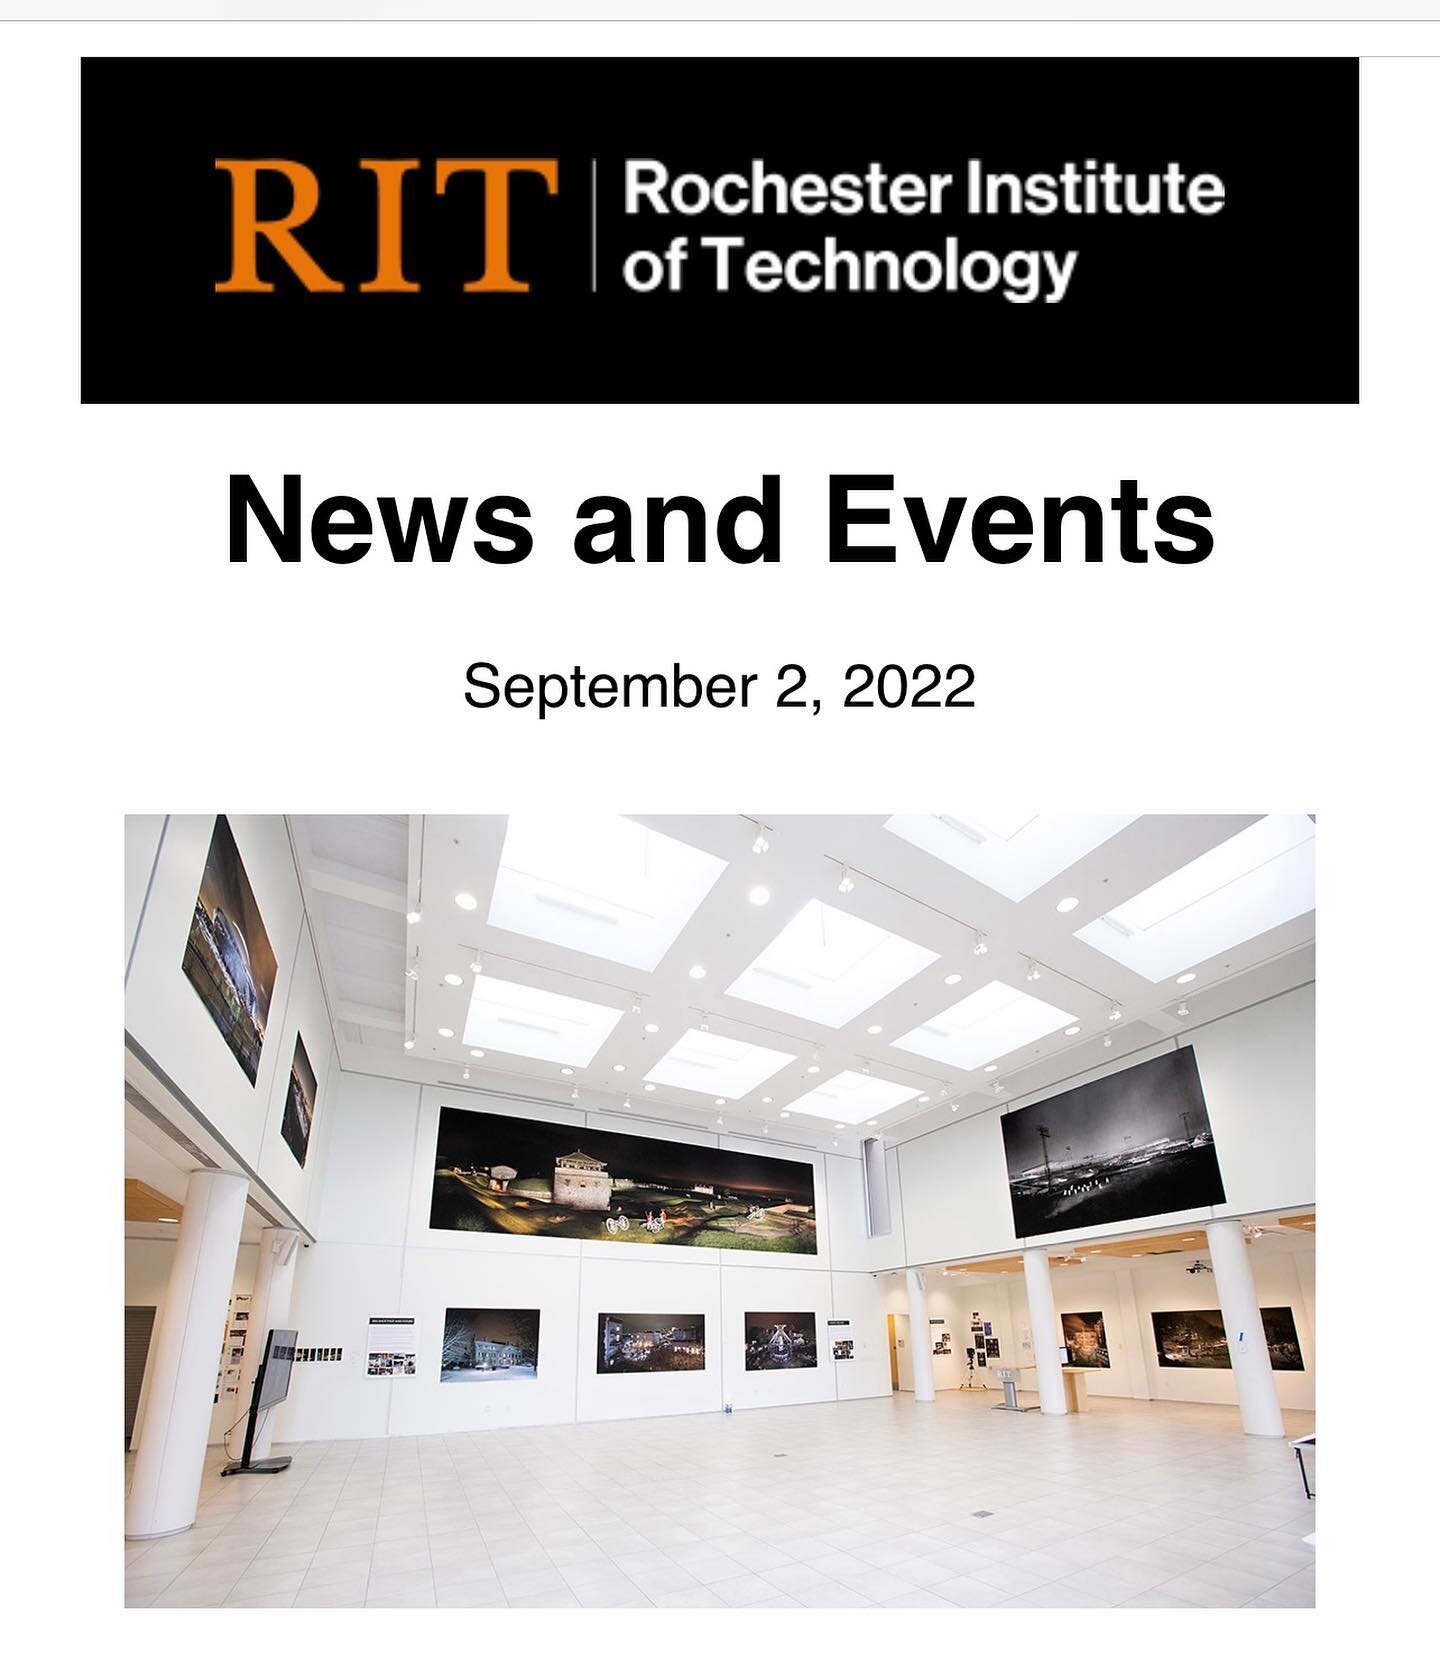 The RIT Big Shot, 35 years of painting with light exhibition opening, is this upcoming Thursday from 4-7 in the University Gallery. Hope to see you there!

During the celebration, we will be announcing our next project.

A podcast interview between m